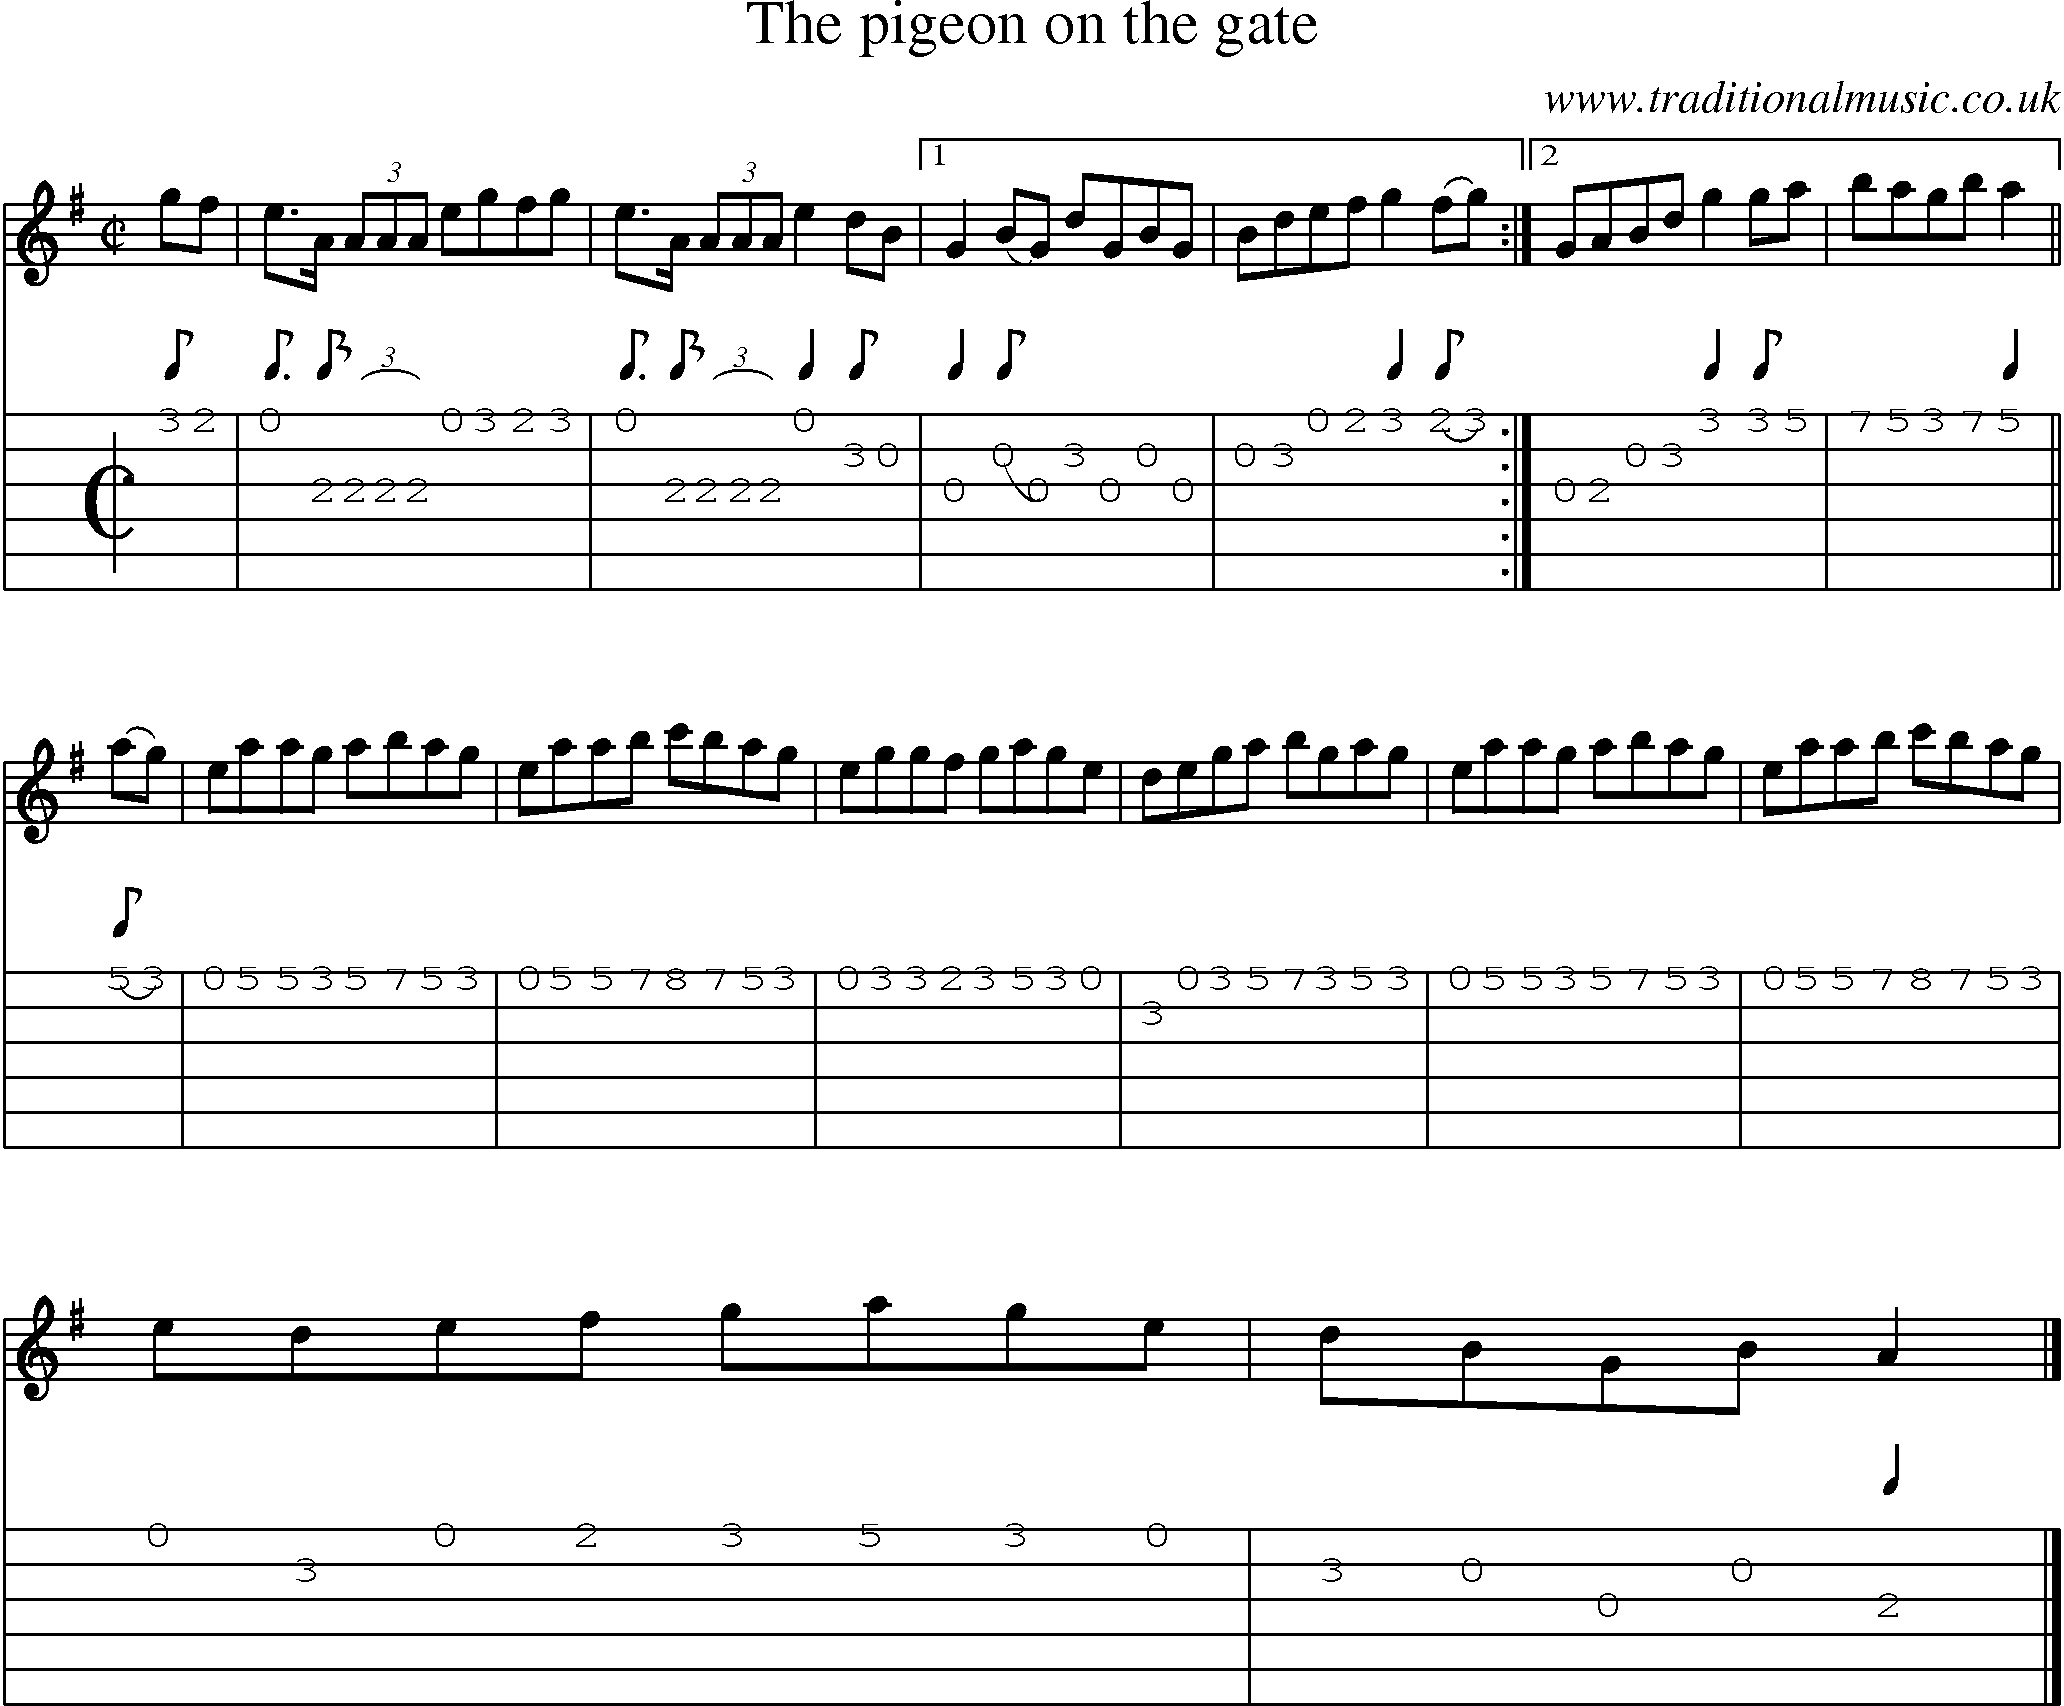 Music Score and Guitar Tabs for Pigeon On The Gate